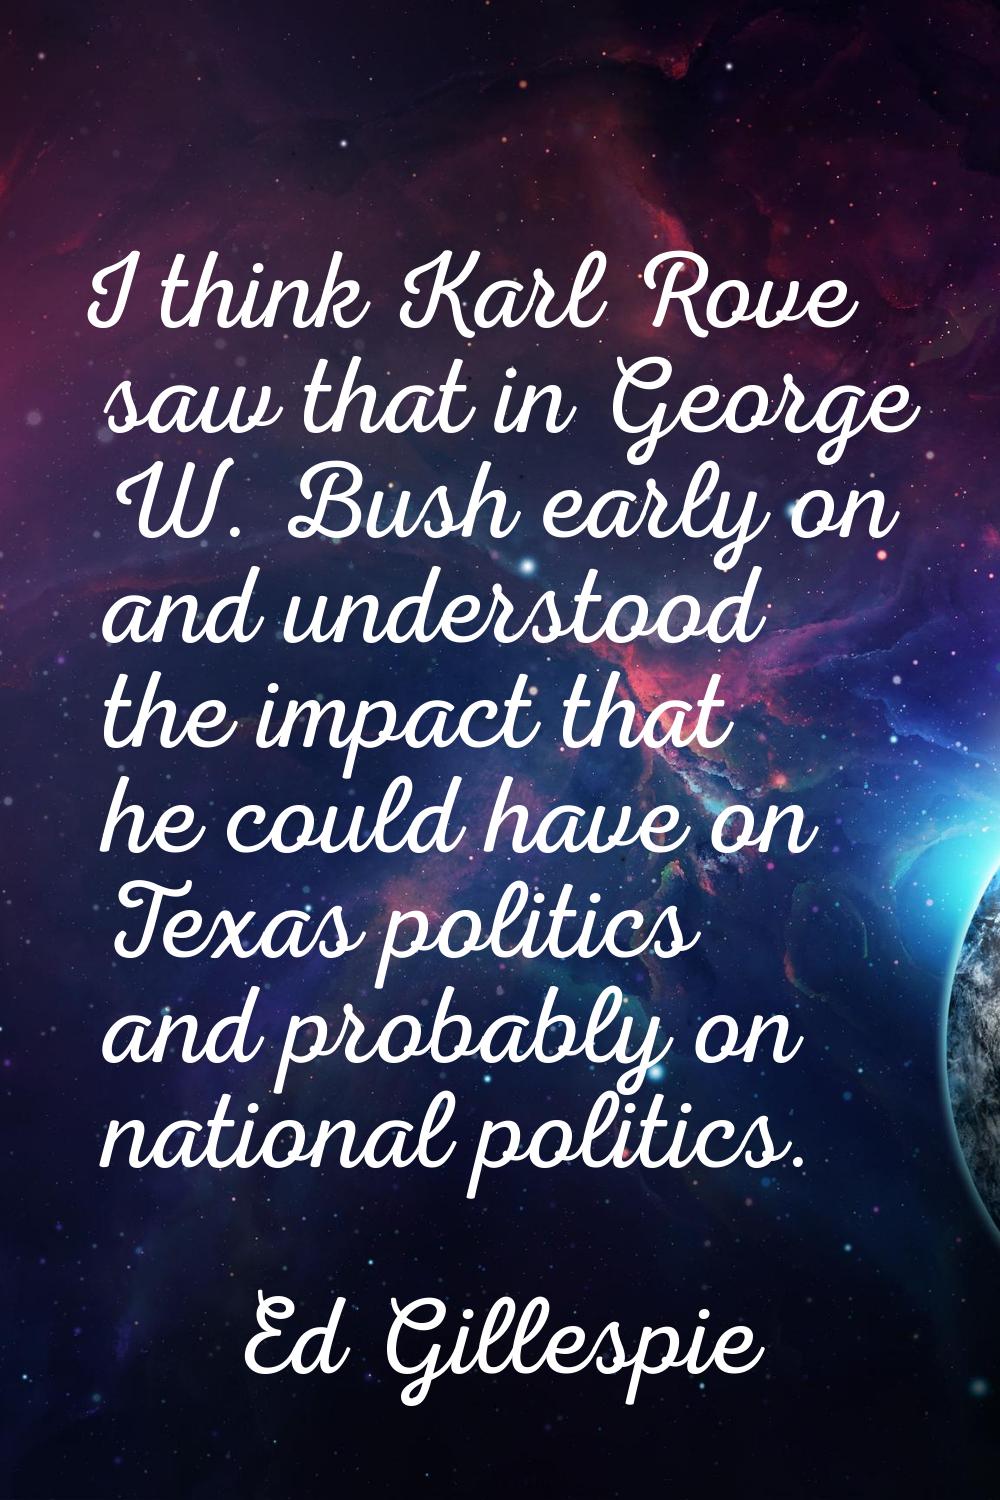 I think Karl Rove saw that in George W. Bush early on and understood the impact that he could have 